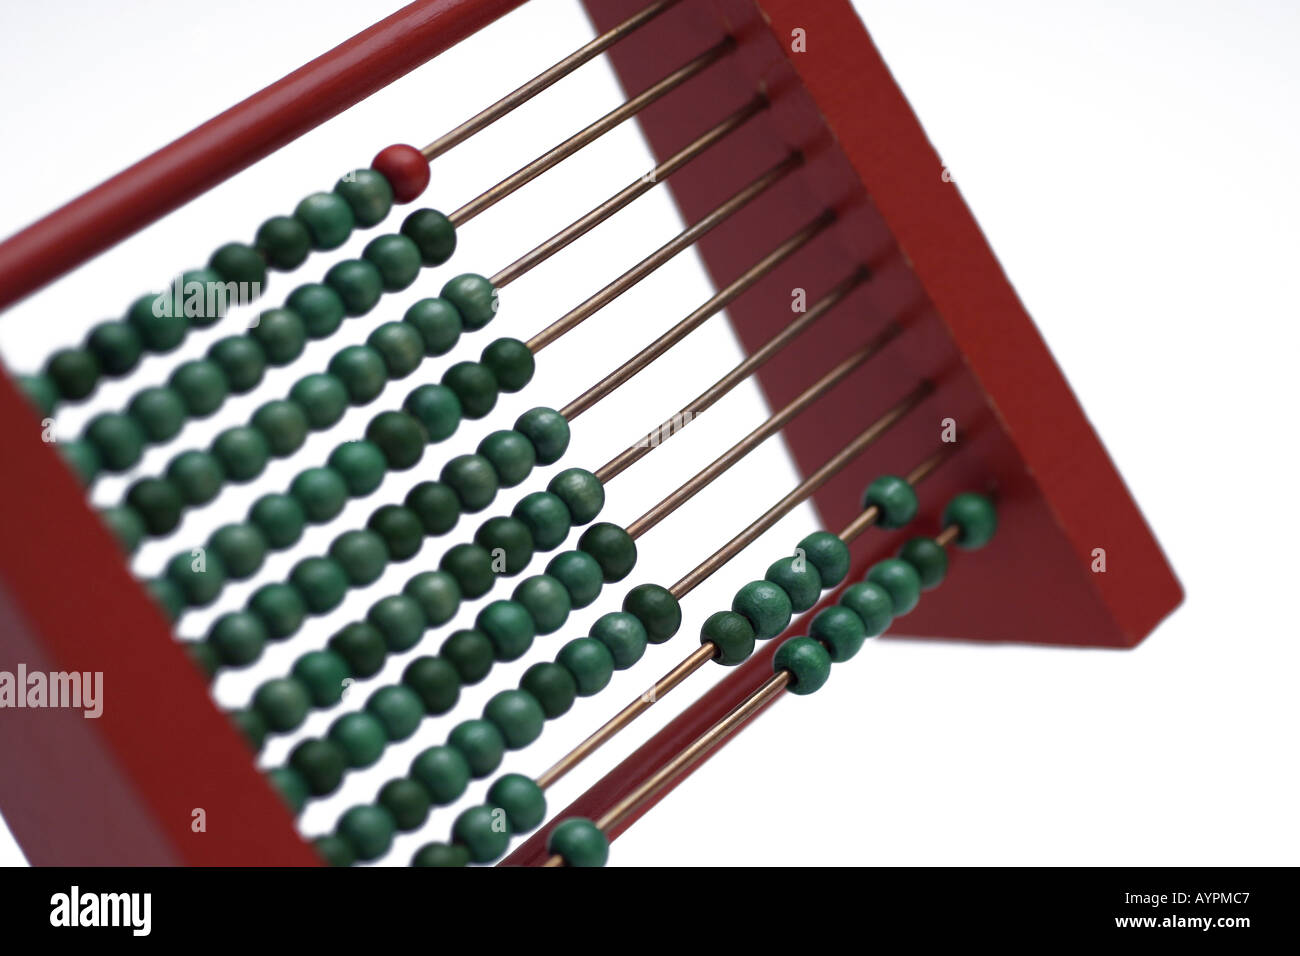 Large number of counters seen inside the rods of an abacus Stock Photo